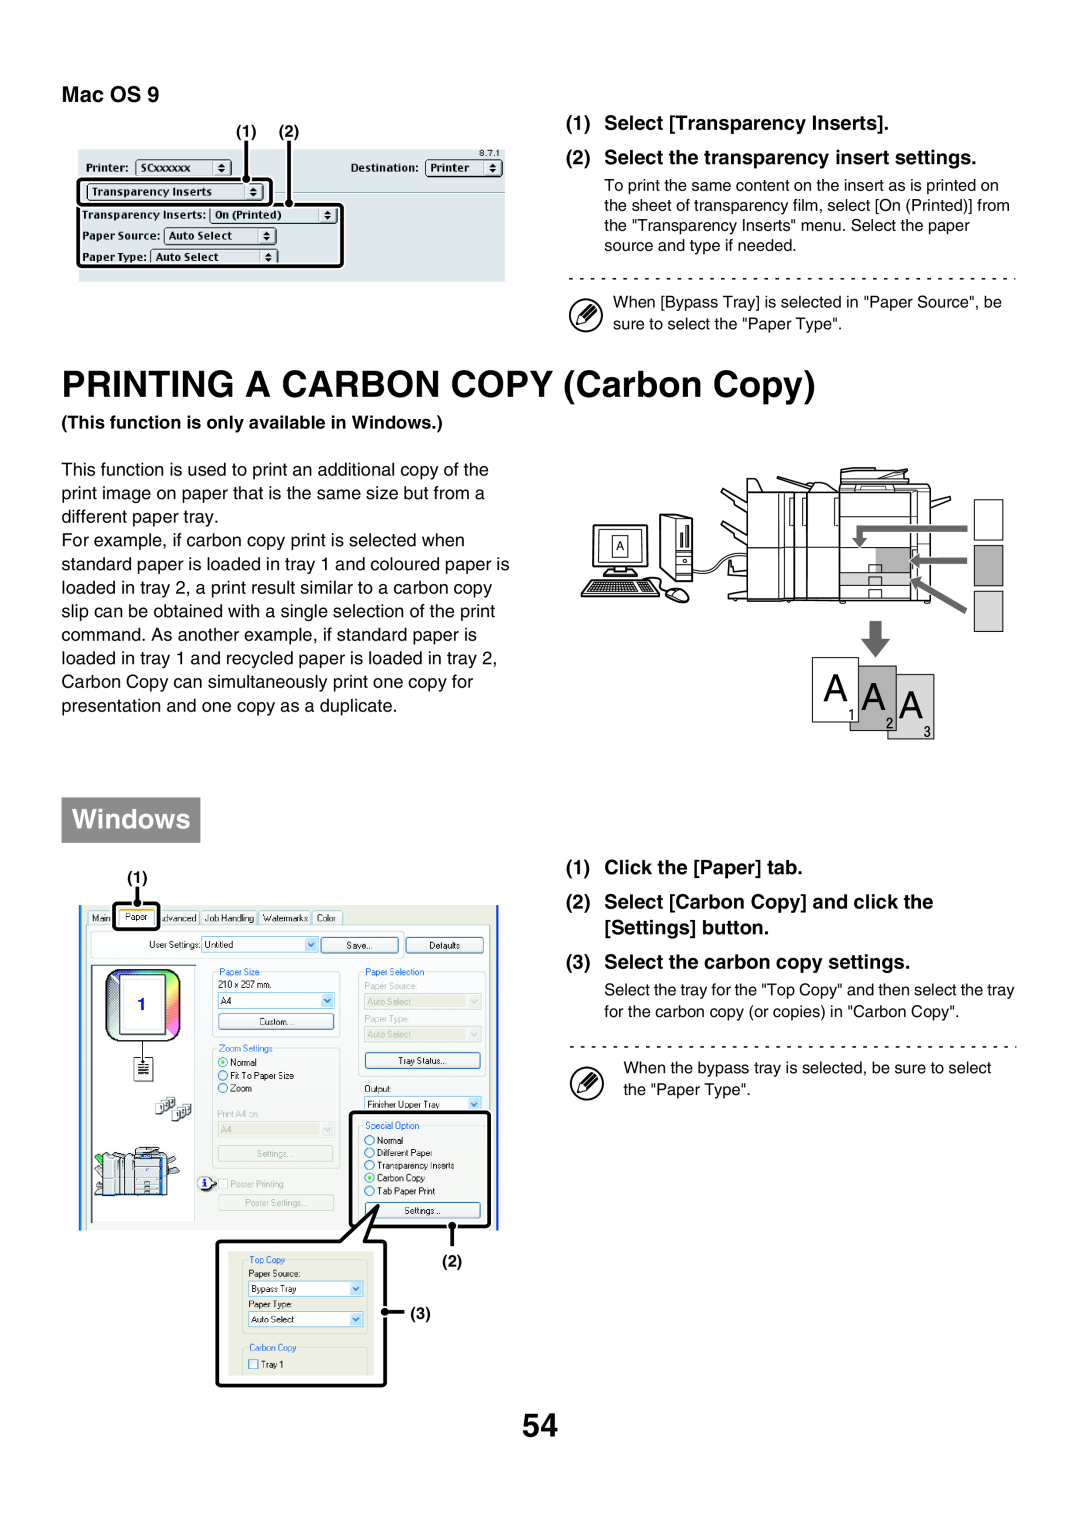 Sharp MX-6200N PRINTING A CARBON COPY Carbon Copy, Select Transparency Inserts, Select the transparency insert settings 